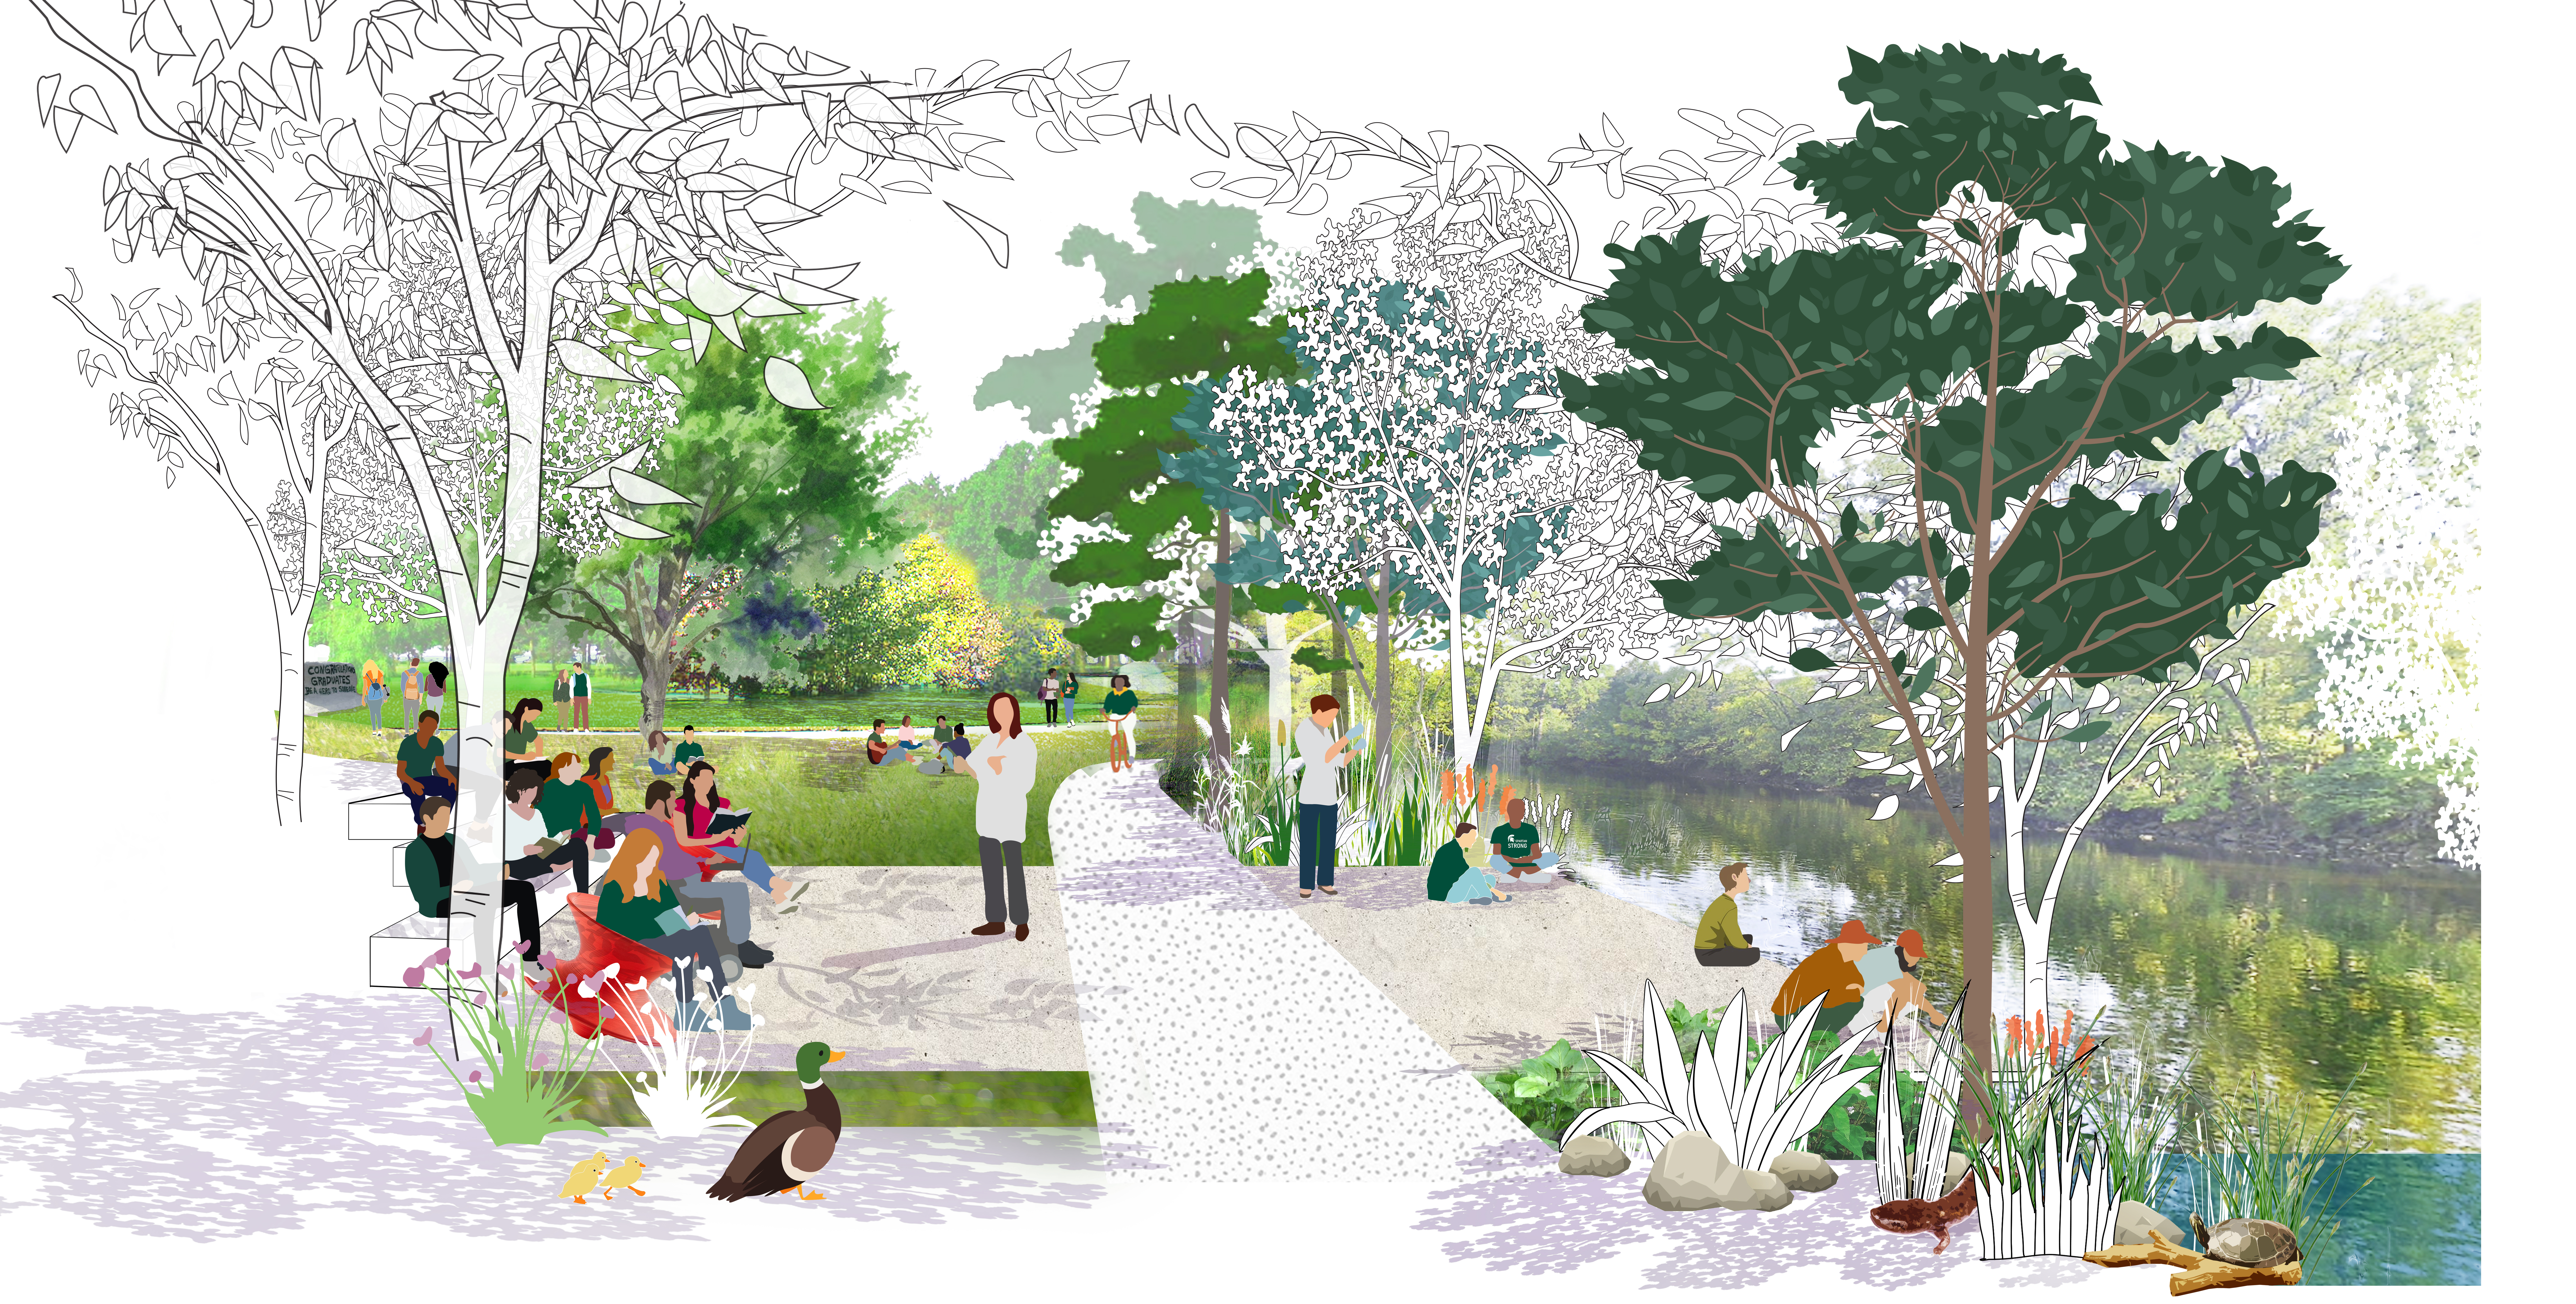 Collaged rendering of campus landscape with trees and walkway alongside a body of water